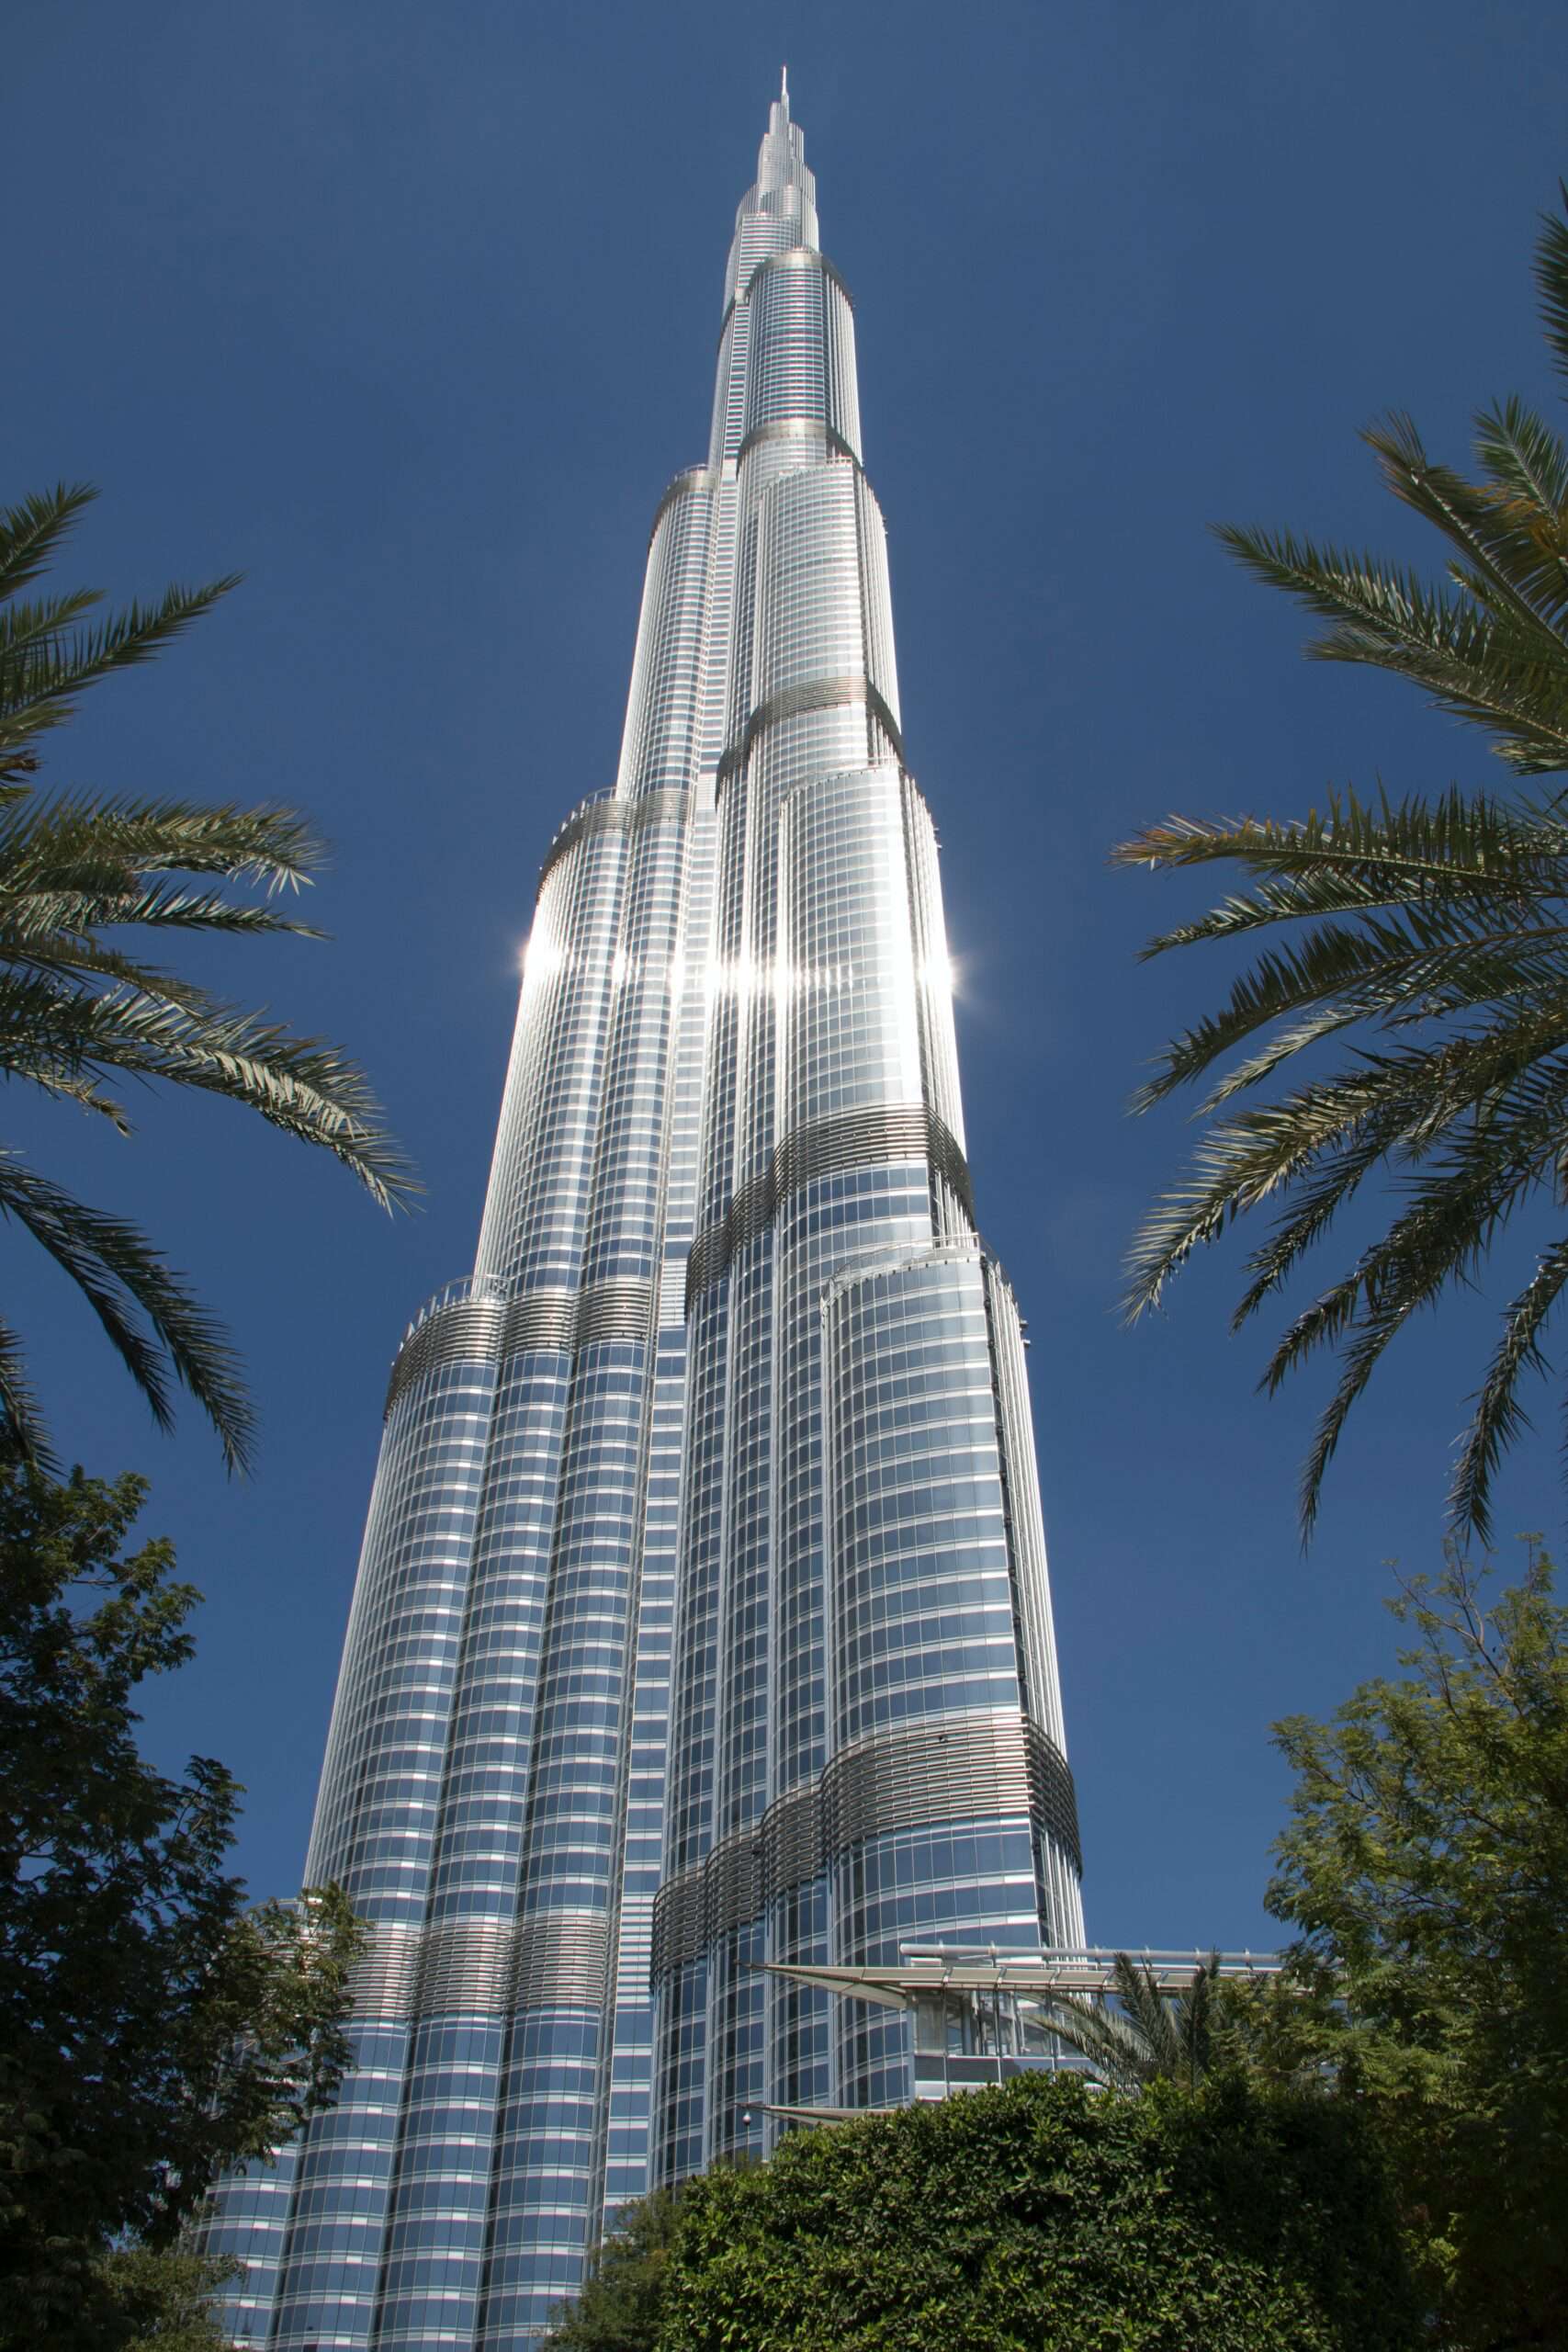 Burj Khalifa one of the most impressive steel structures in the world